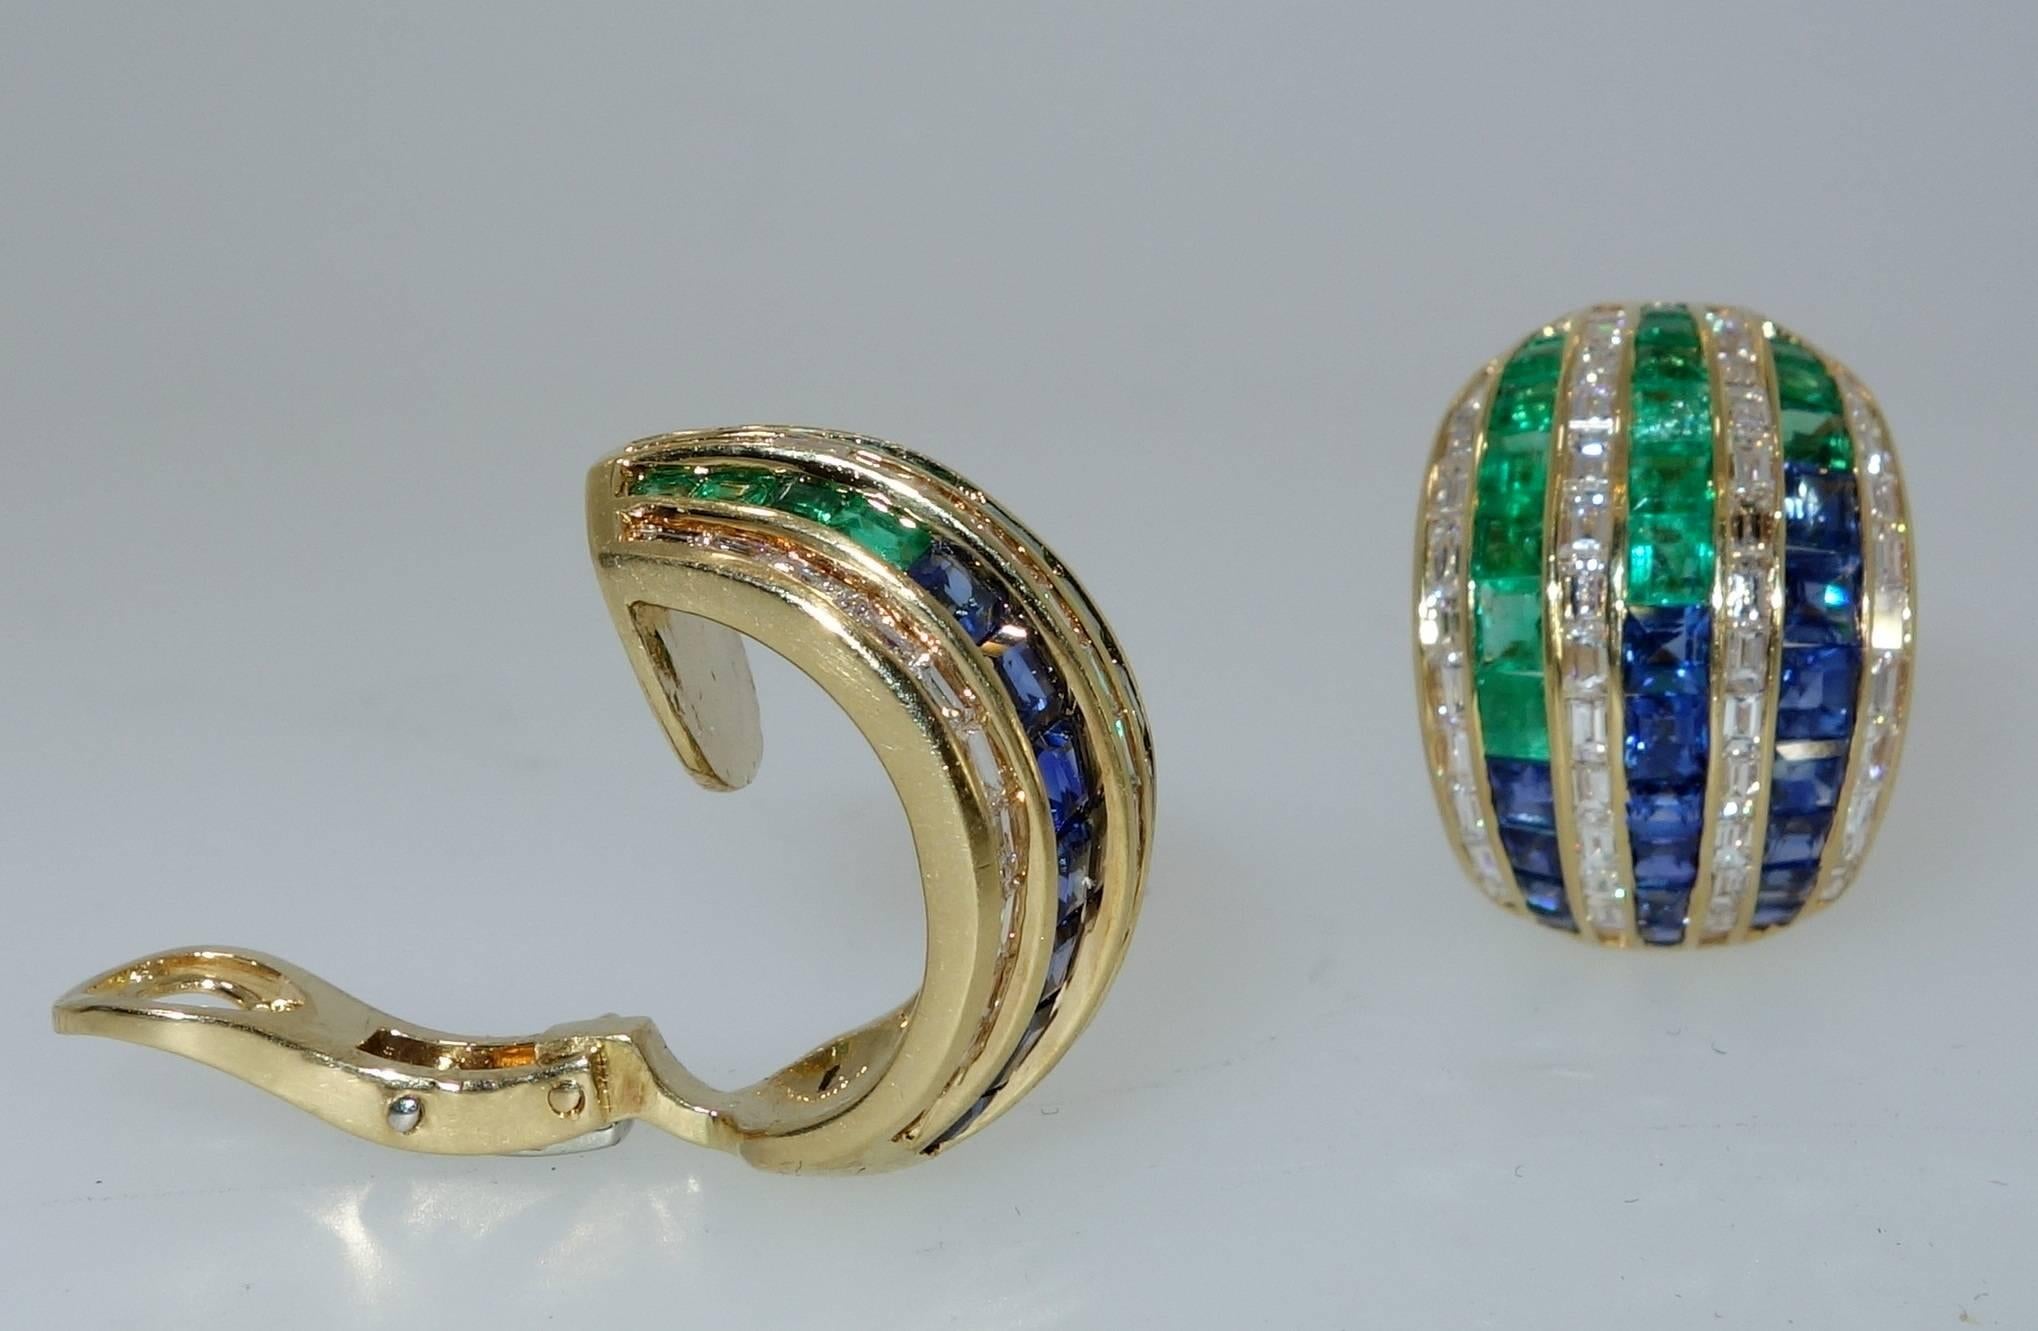 Five carats of diamonds, two carats of emeralds and 2.7 carats of sapphires in 18K.  The Earrings are an unusual design by the famous London designer, David Morris.